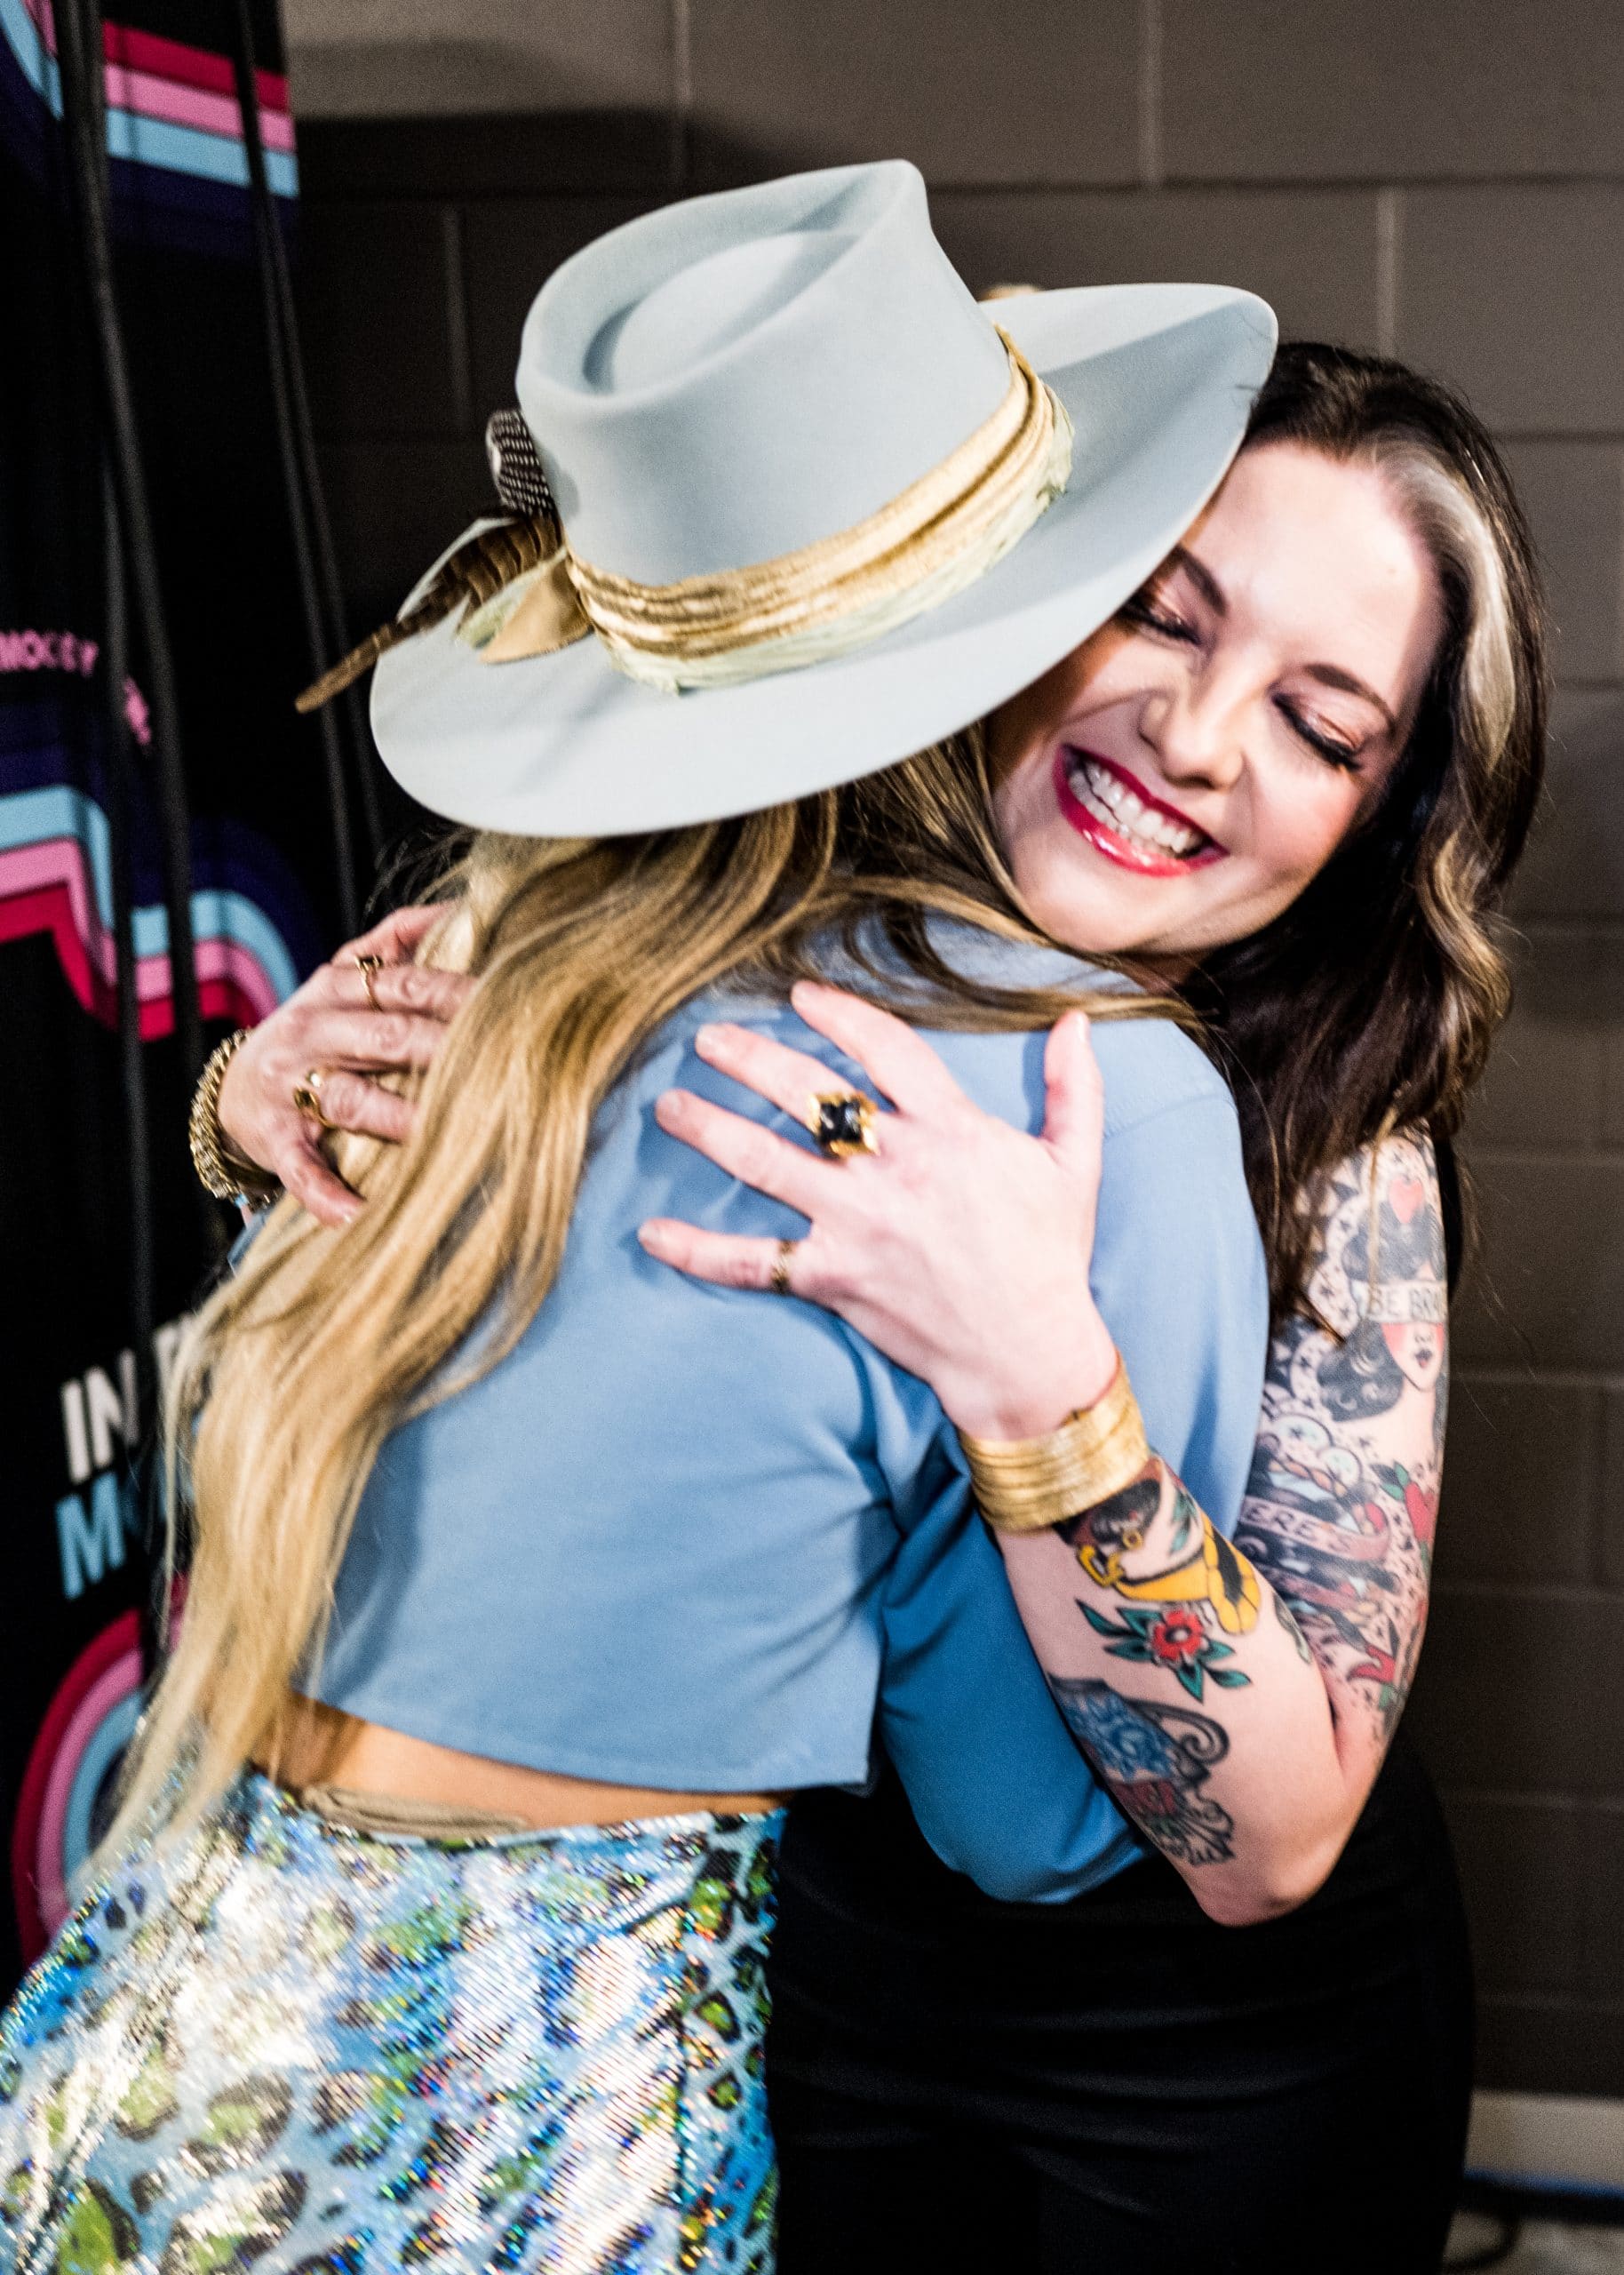 Lainey Wilson hugs Ashley McBryde at the 2023 CMT Music Awards